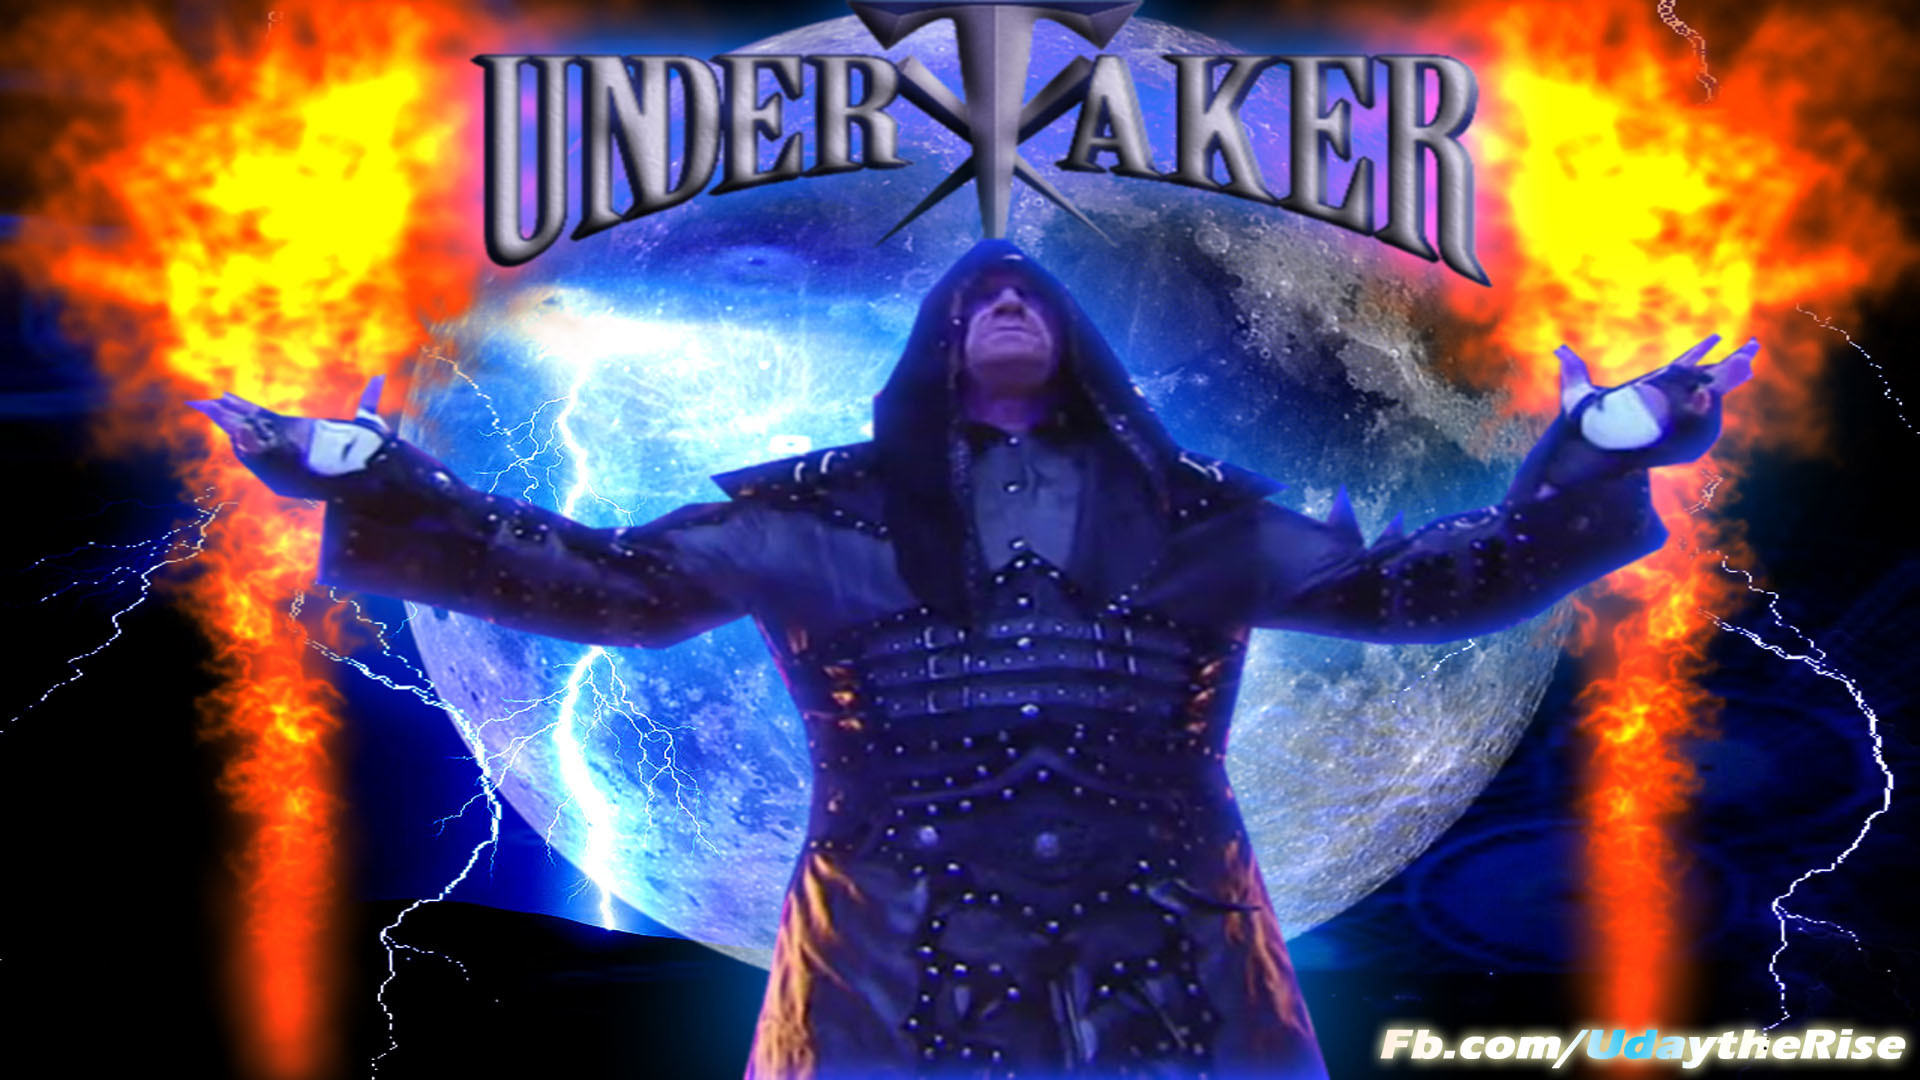 1920x1080 39 best images about Undertaker on Pinterest